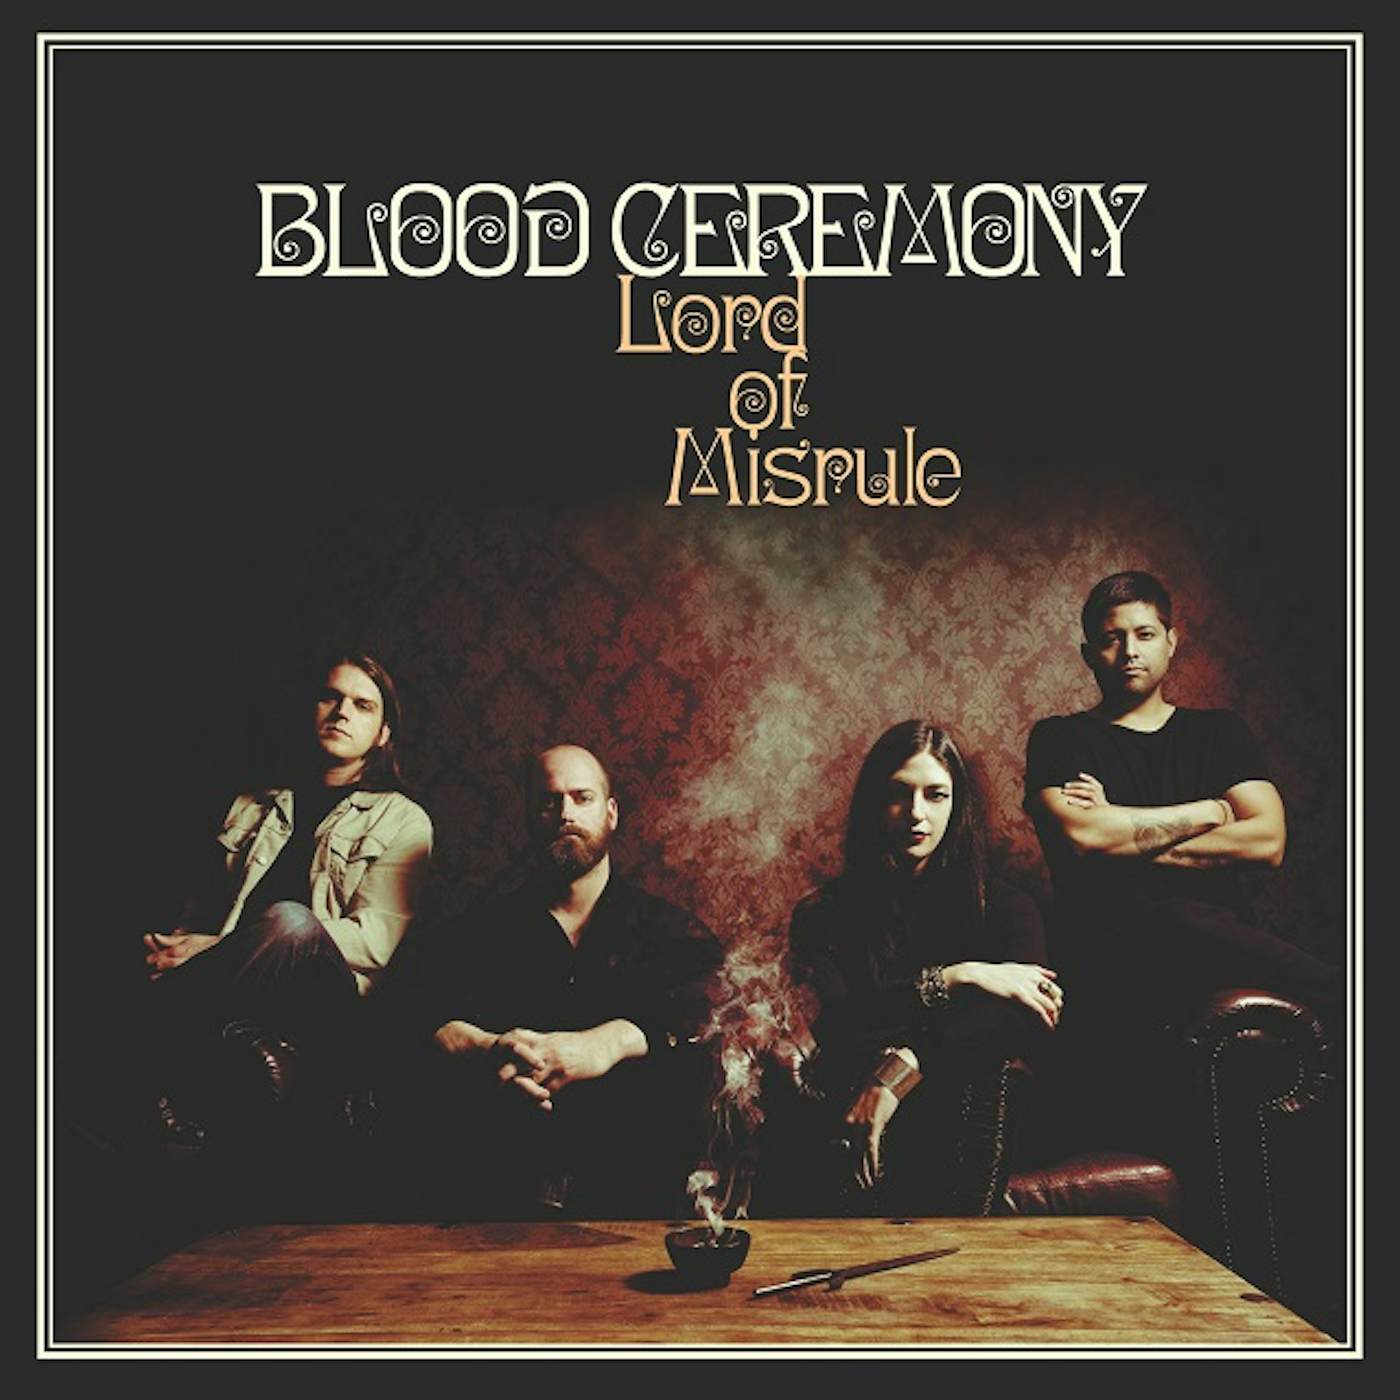 Blood Ceremony Lord of Misrule Vinyl Record